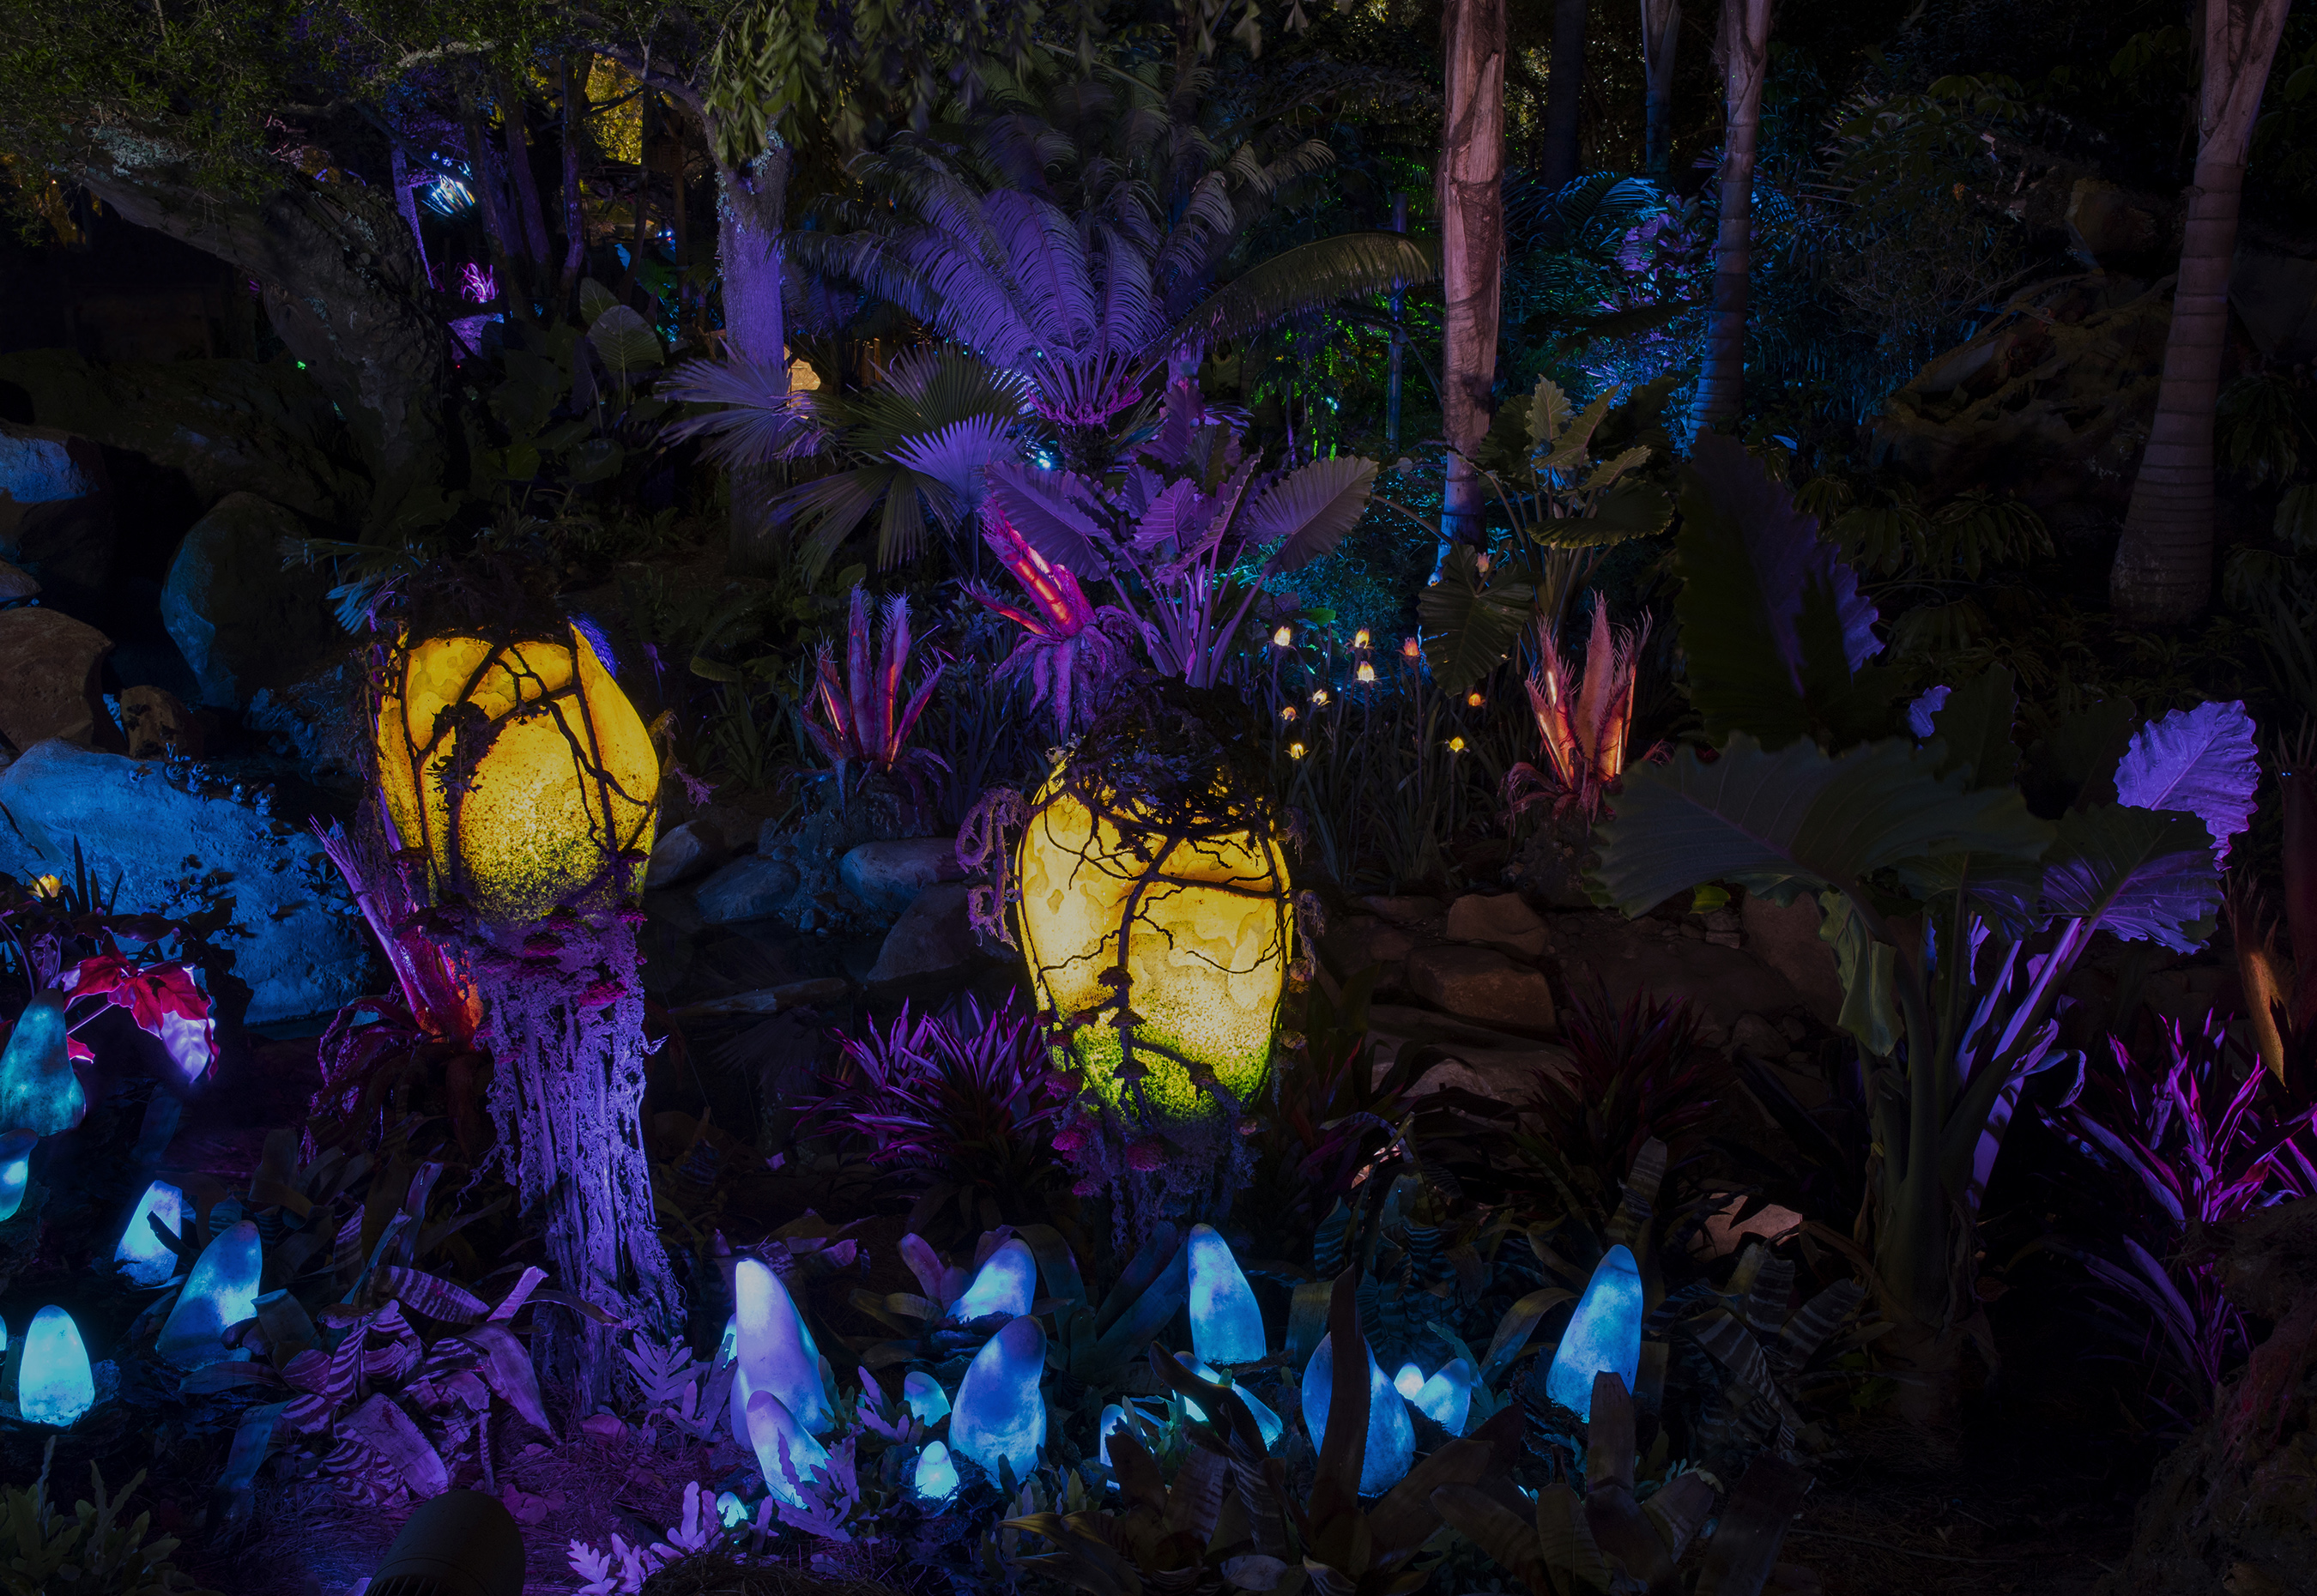 Avatar Flight of Passage will soon open at Pandora-The World of Avatar. Find out more about this unique new ride coming to Disney's Animal Kingdom park. 